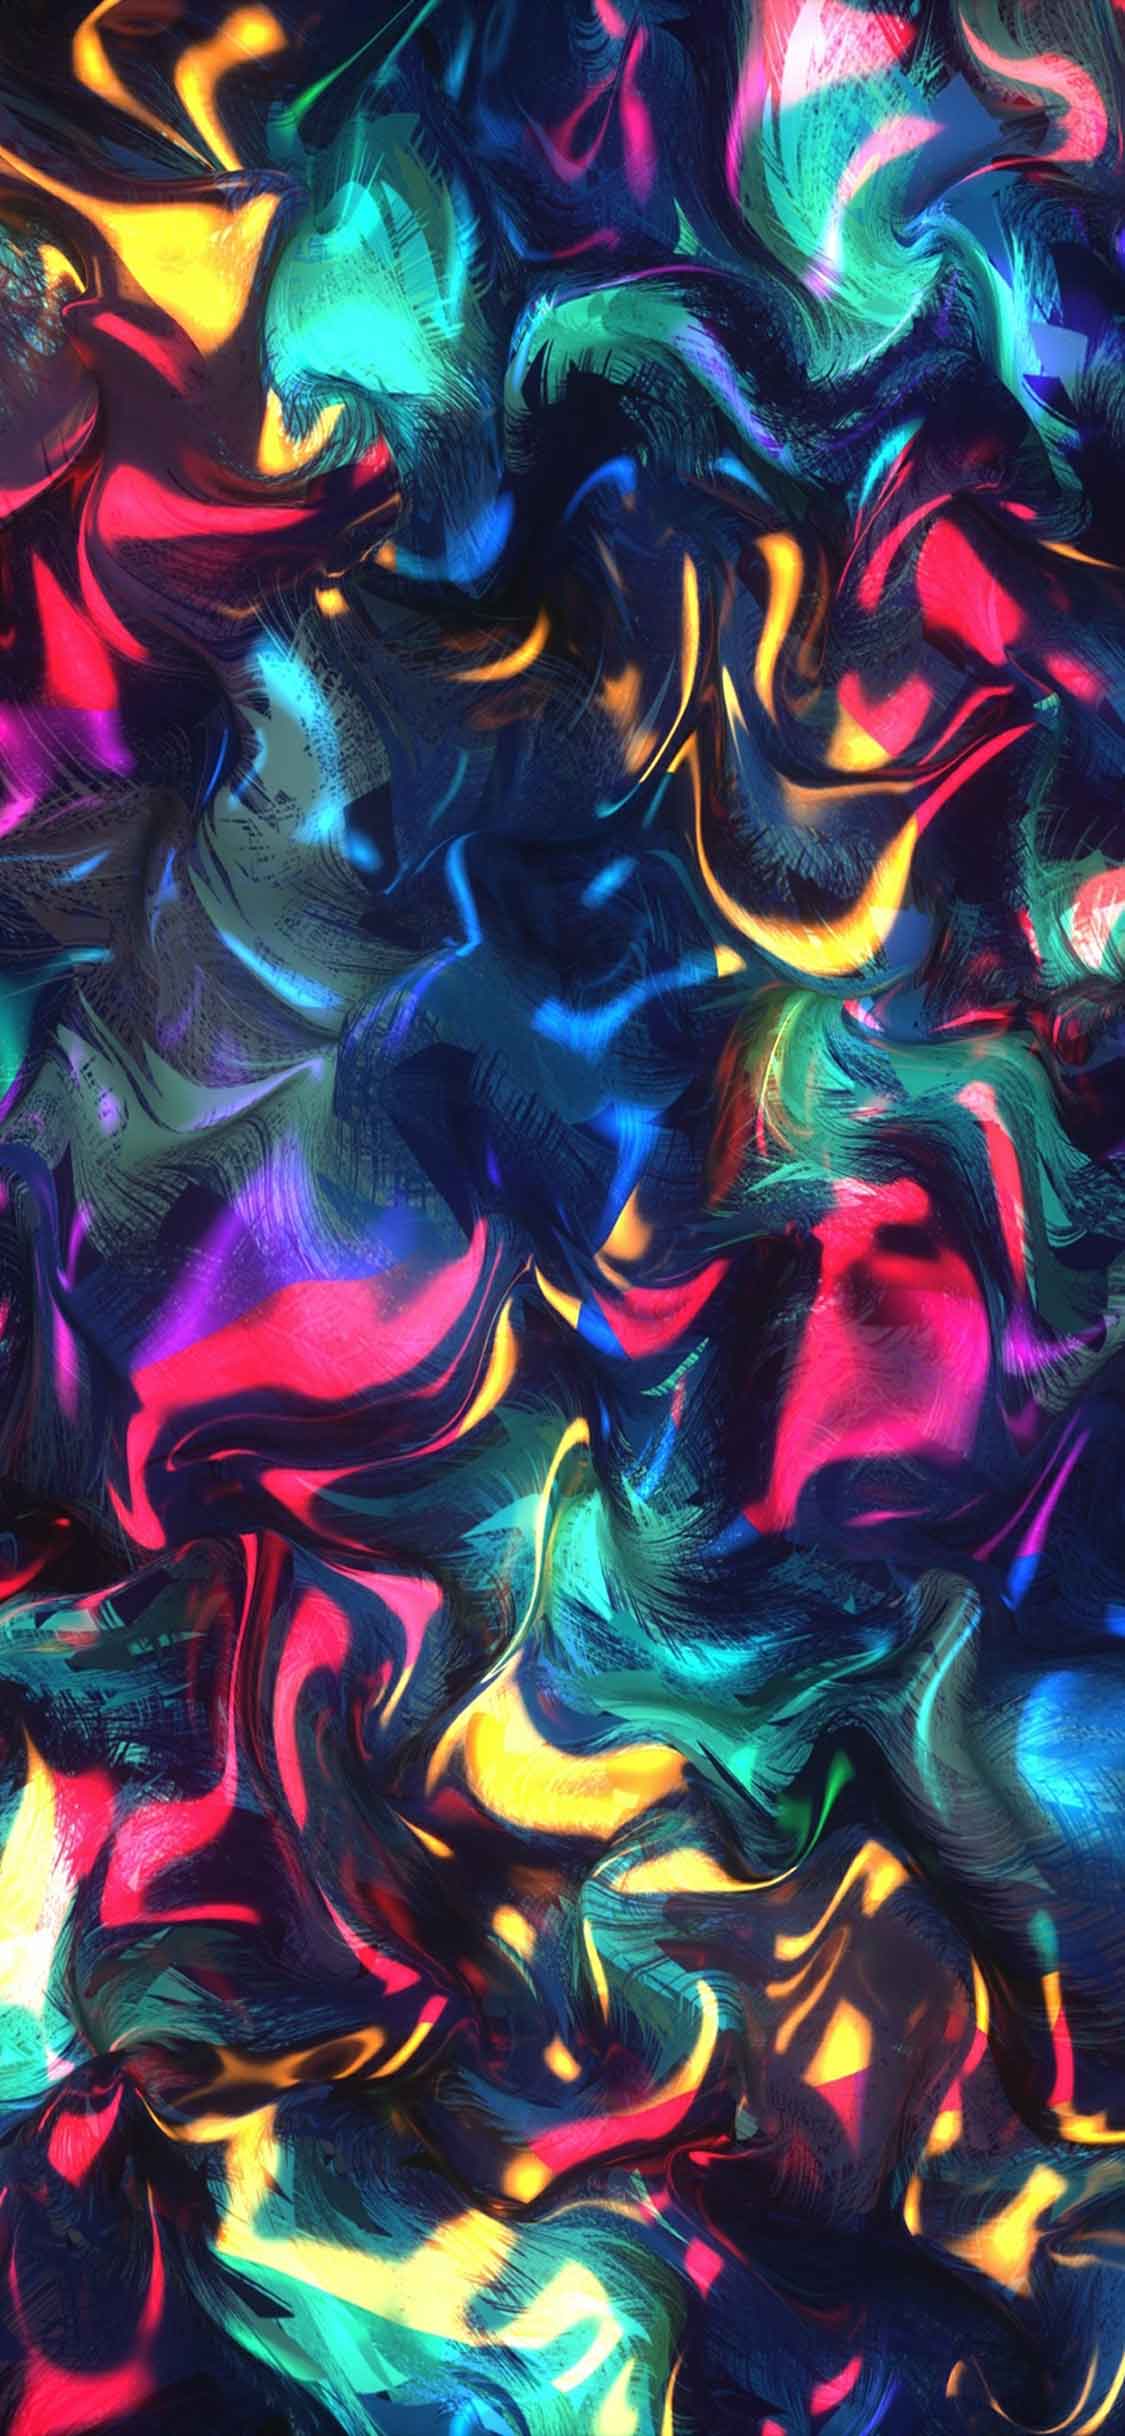 New Cool iPhone X Wallpaper & Background to freshen up your screen